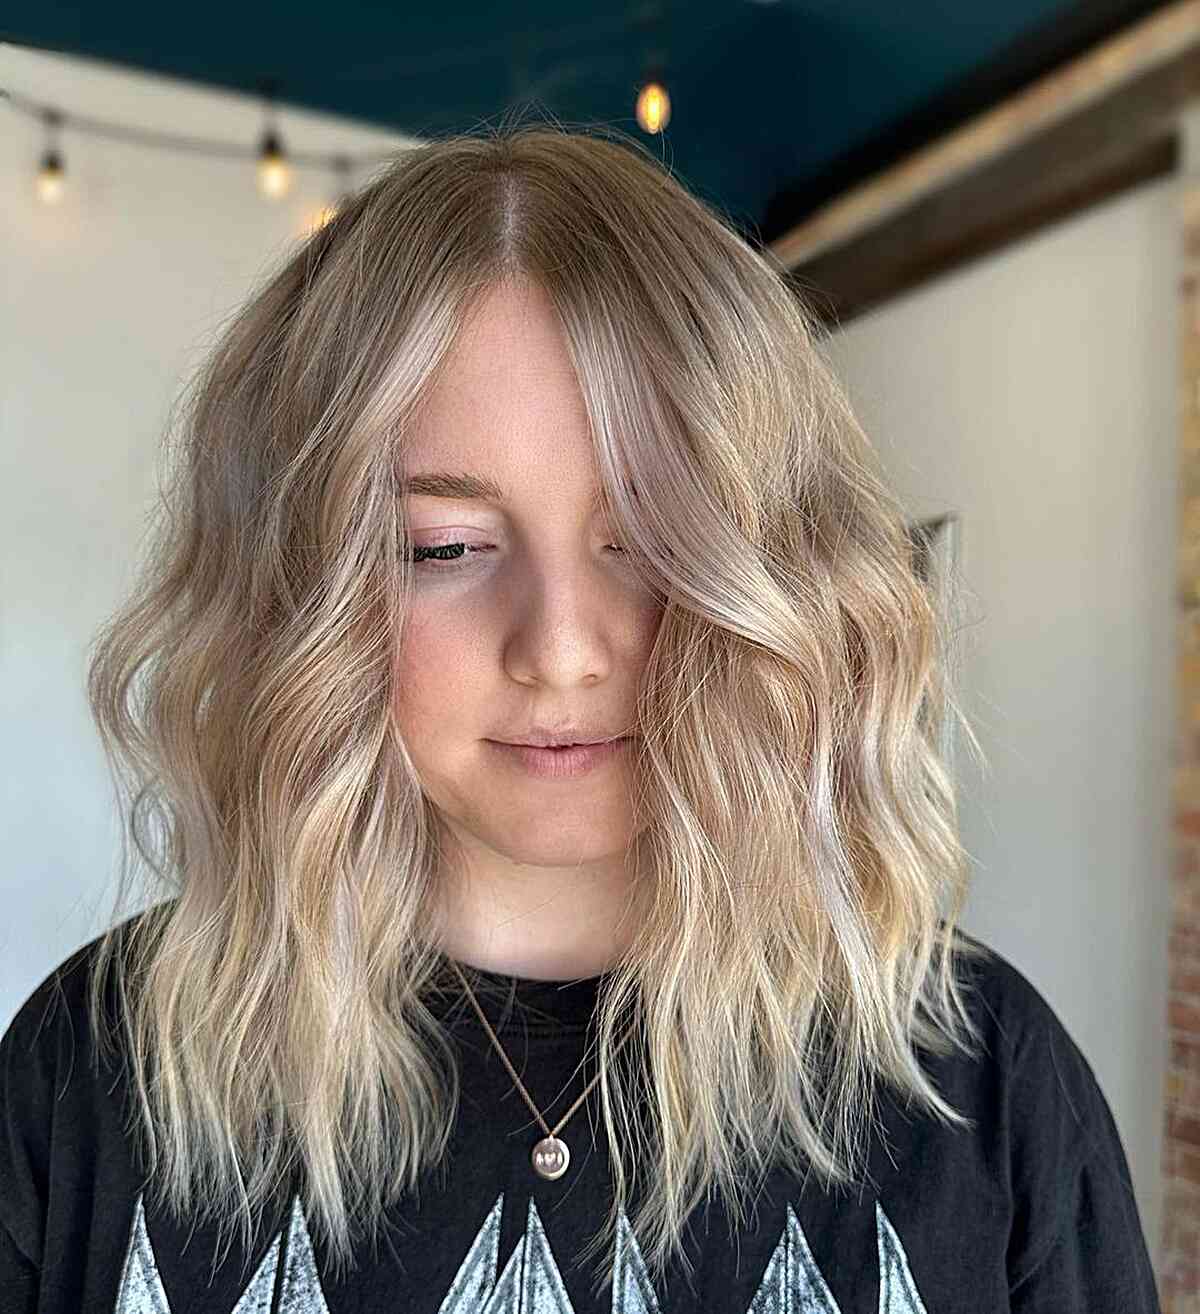 Light Blonde Balayage Hairstyle for girls in their 20s